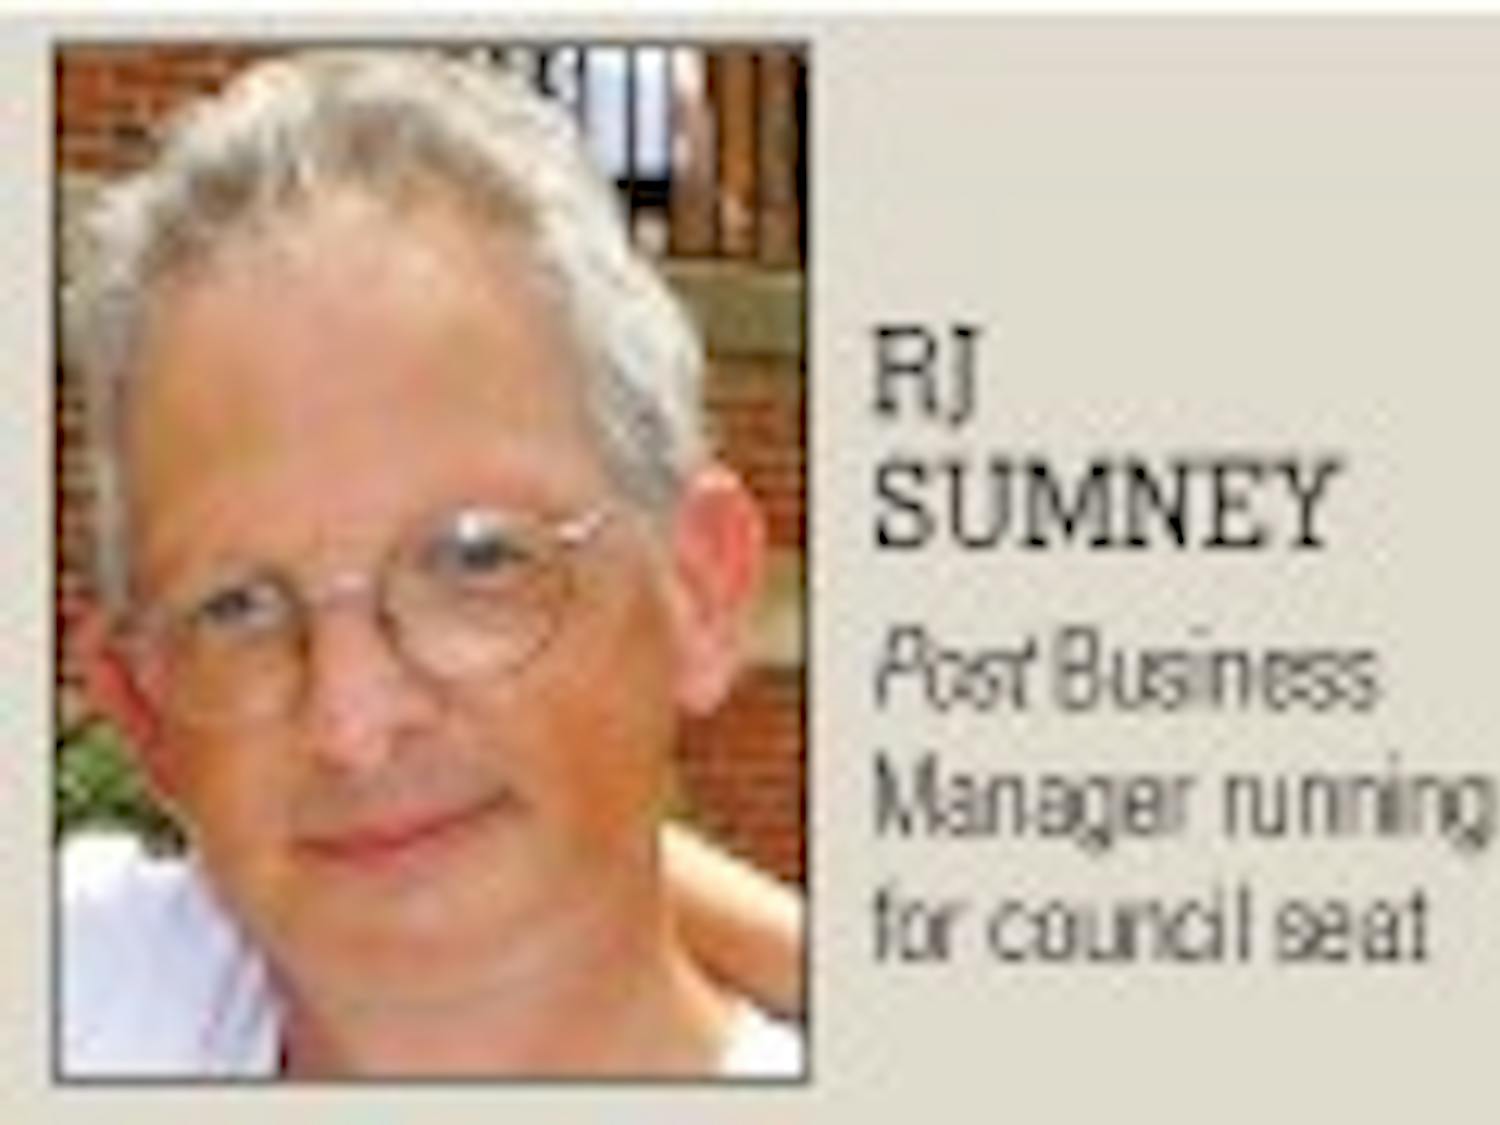 'Post' business manager submits petition to run for Council 3rd Ward seat  